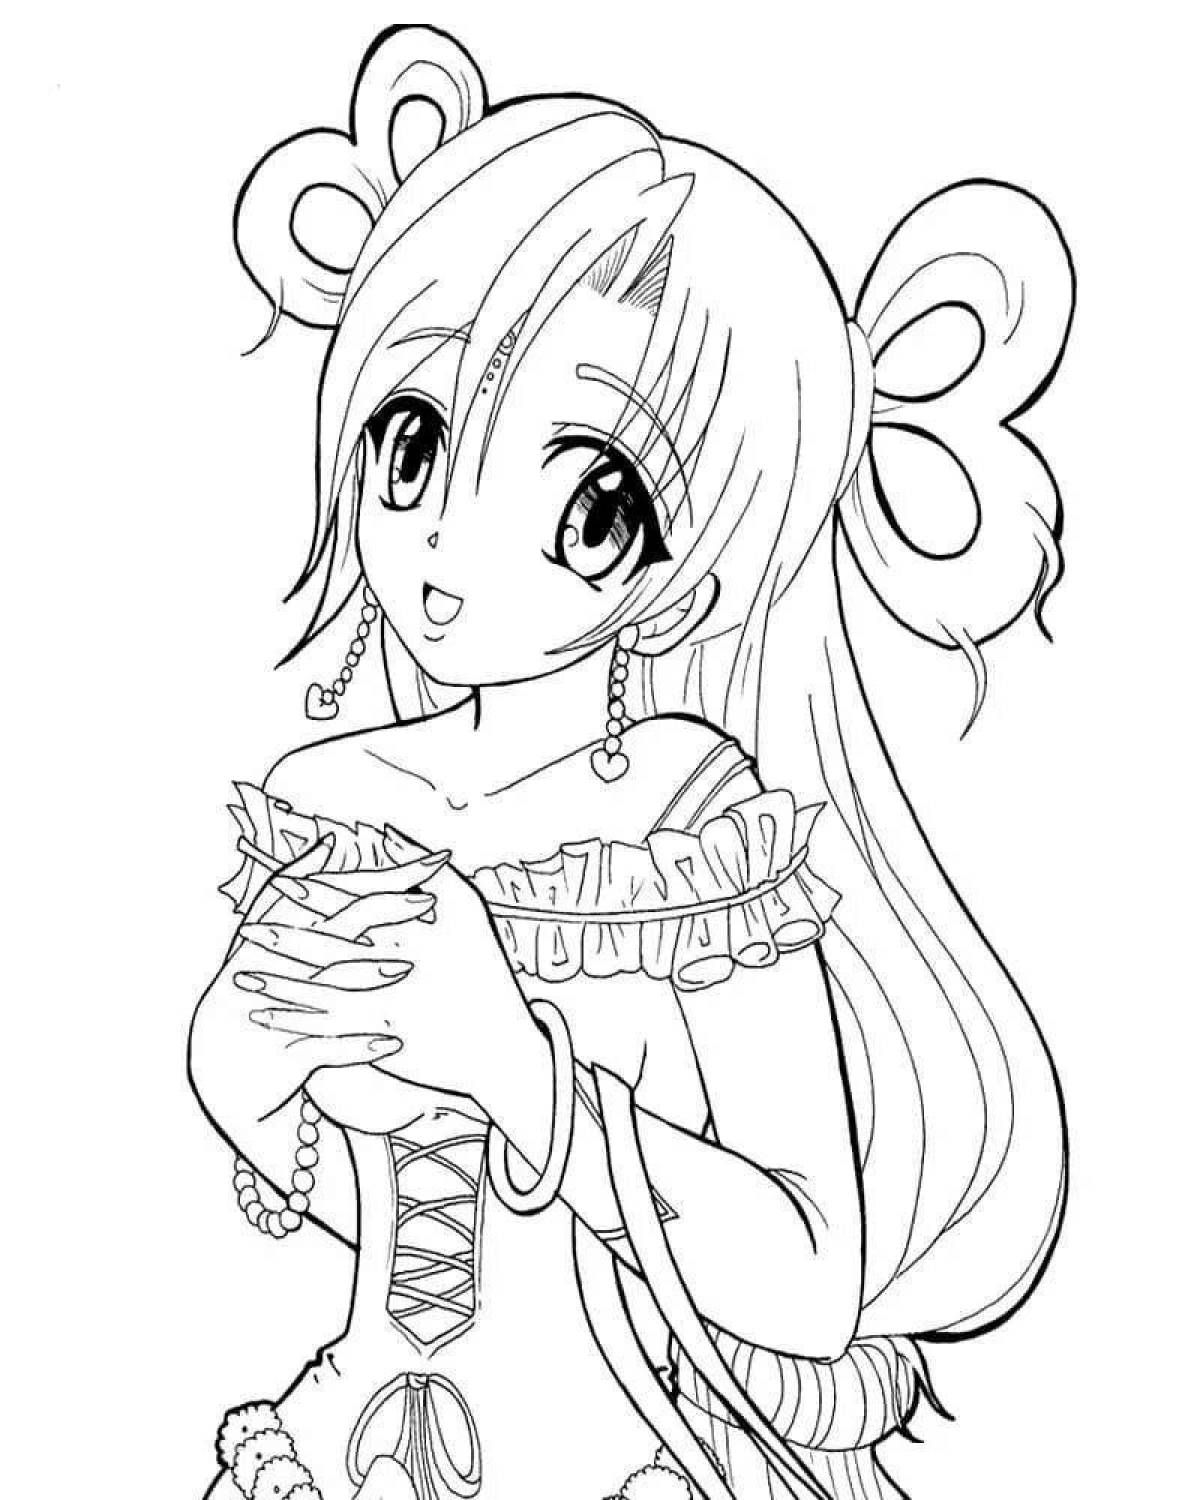 Adorable anime coloring book for girls